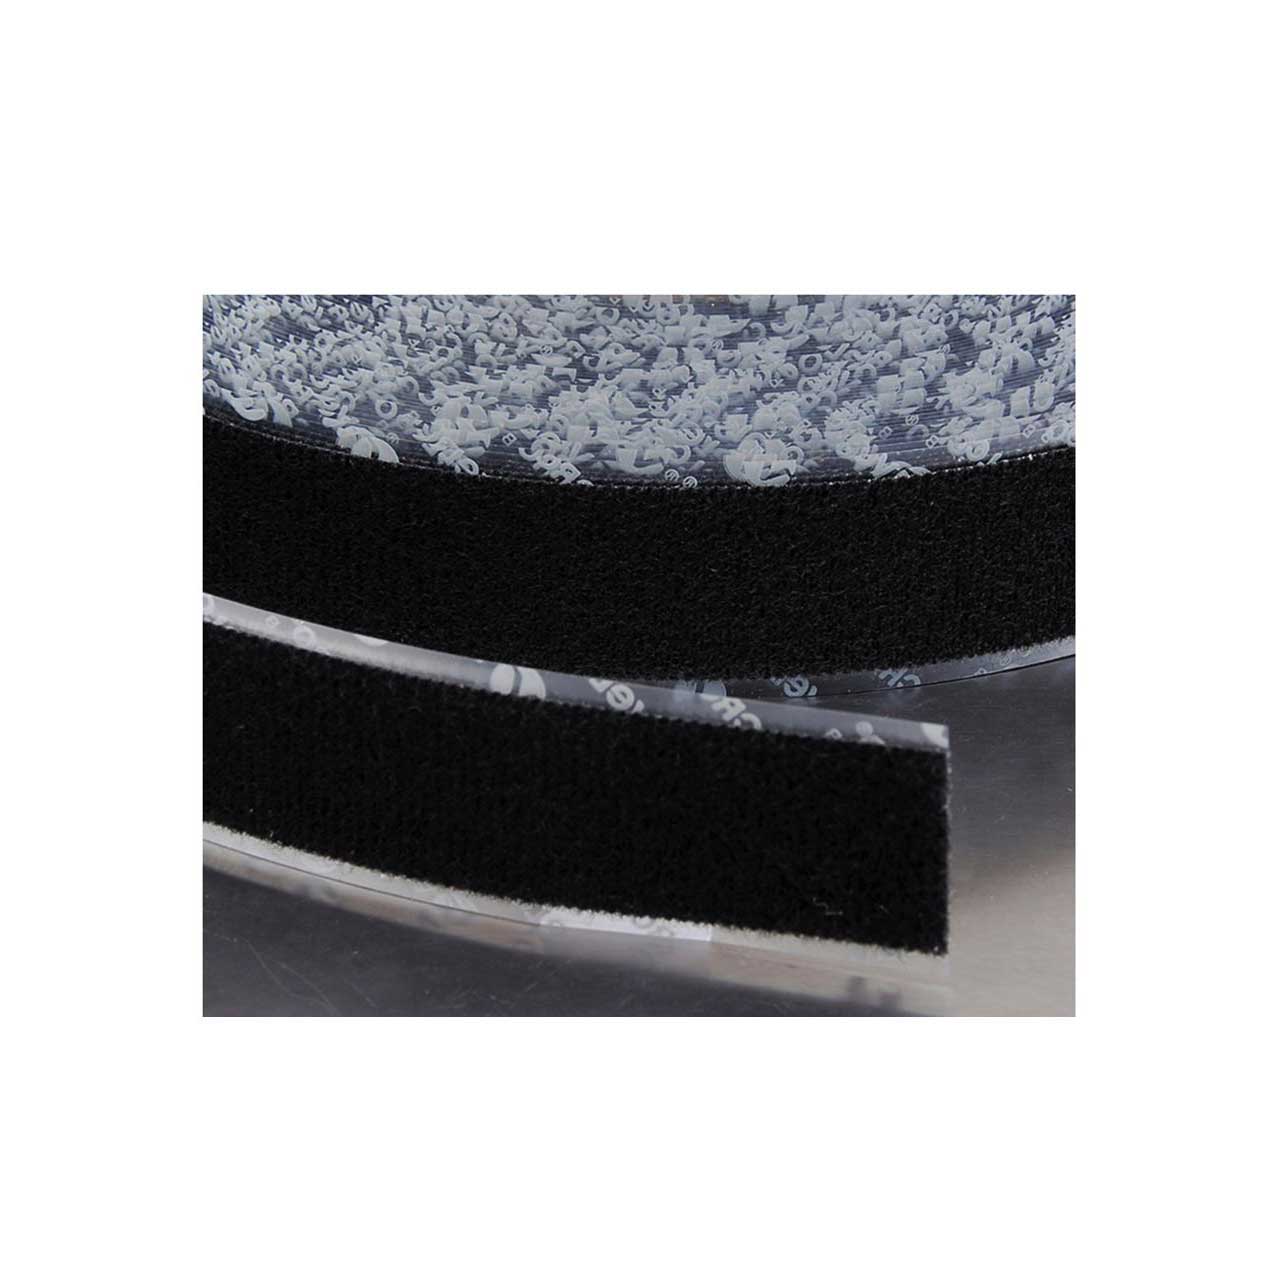 VELCRO® Brand 190984 Tape On A Roll Pressure Sensitive Acrylic Adhesive  Loop - 1 Inch x 25 Yards - Black